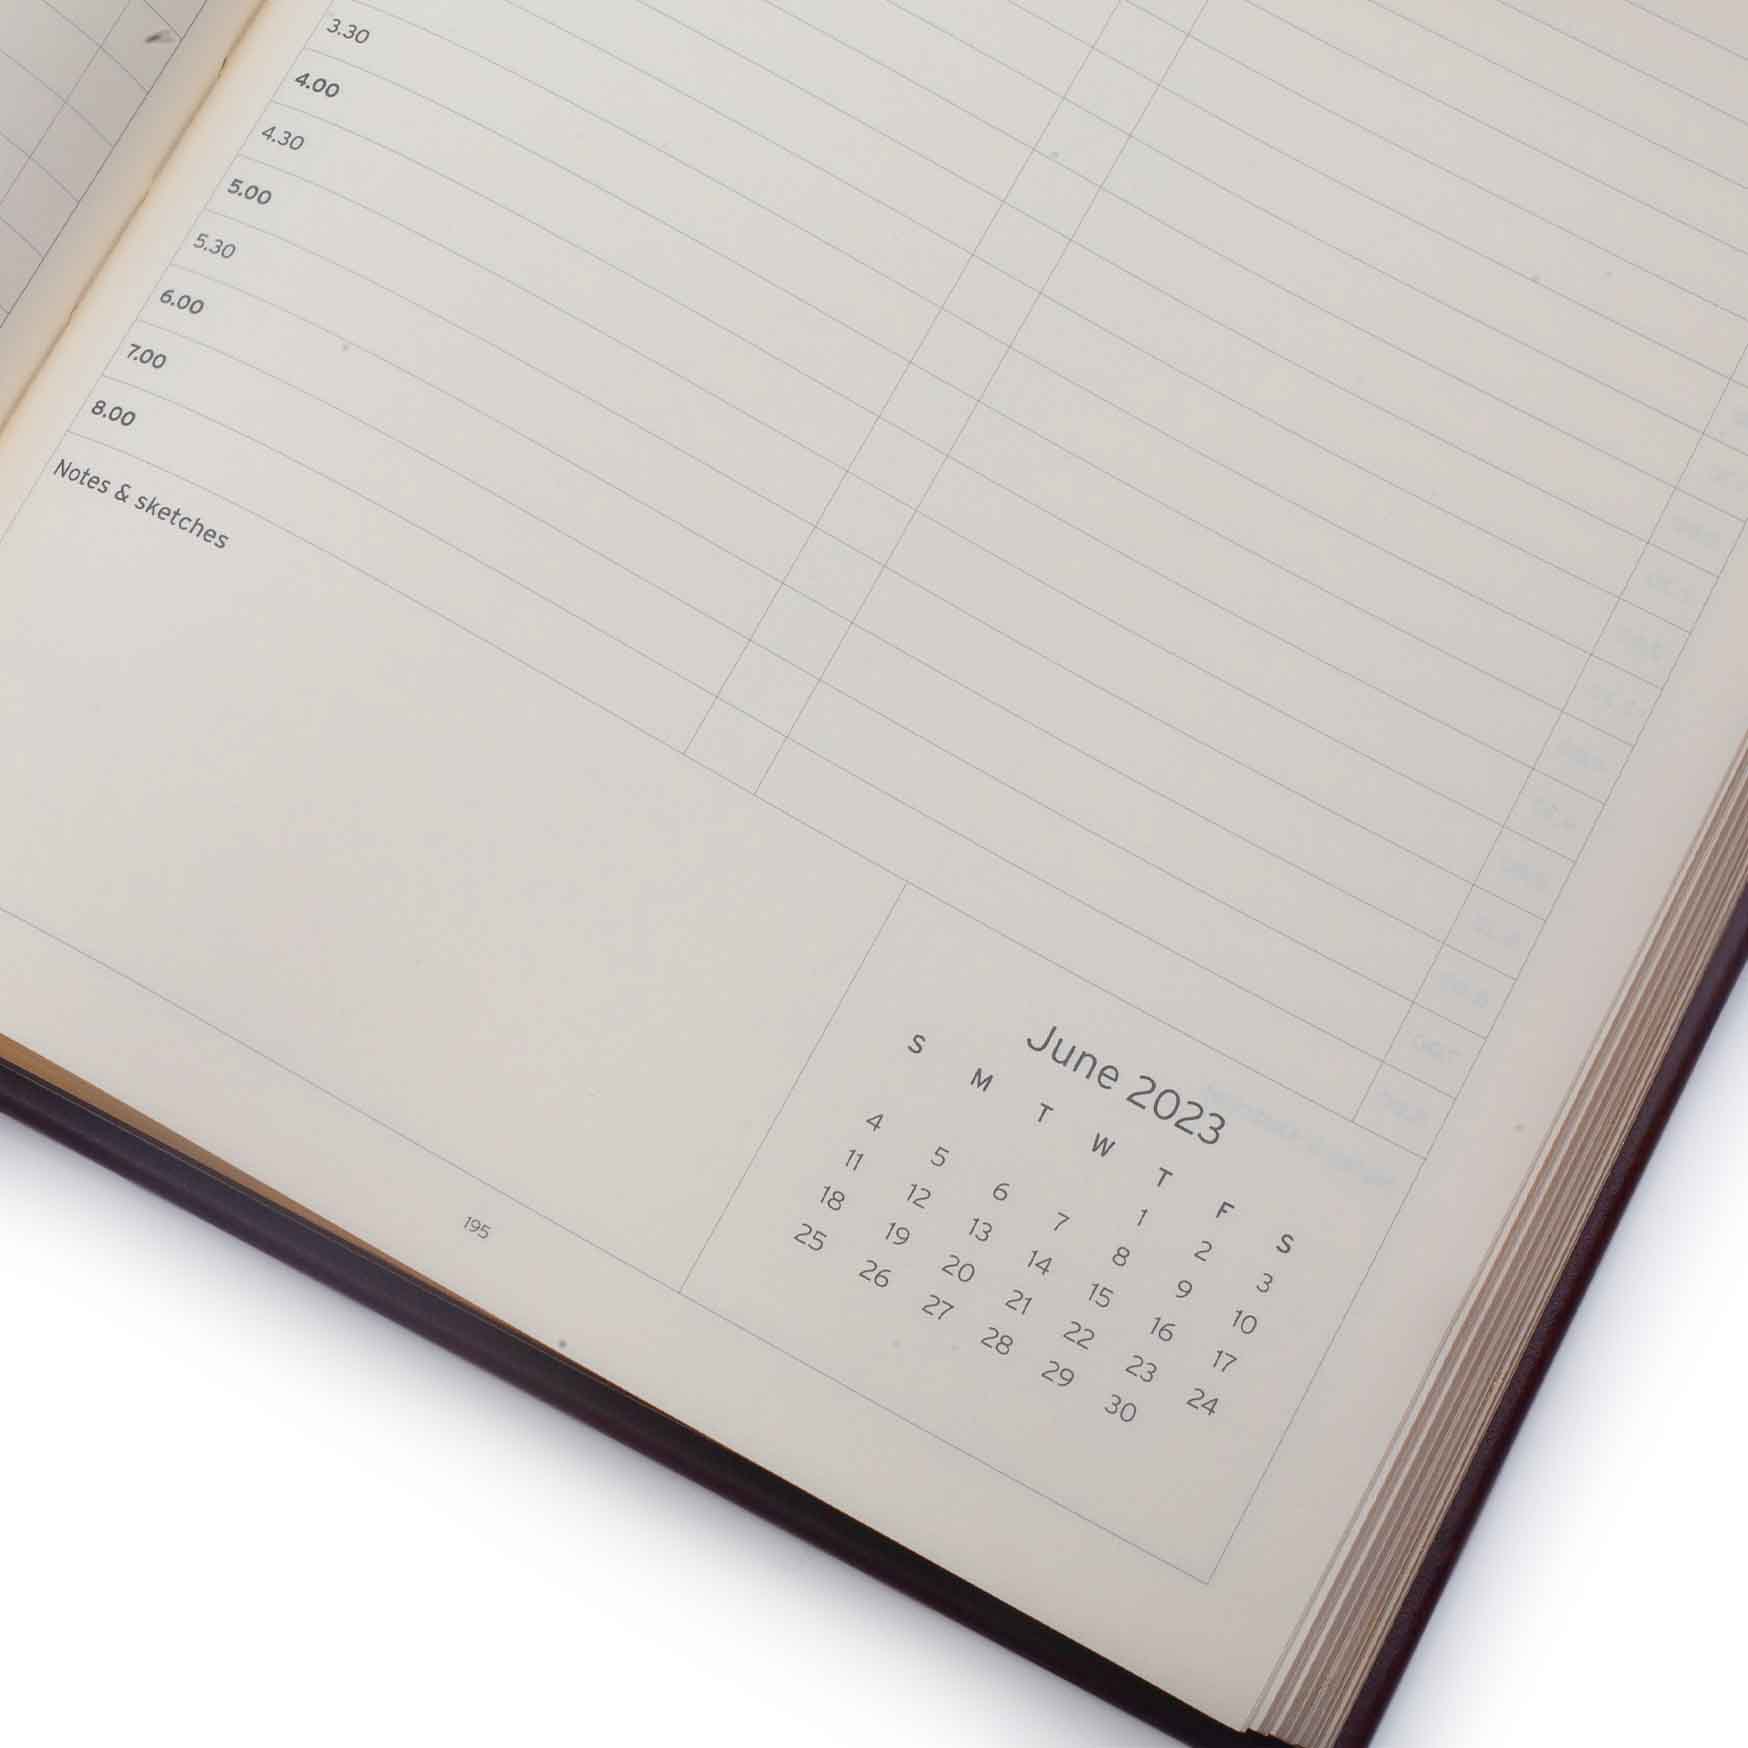 Image shows a close up on the calendar on the daily page in the Rustik Mauriati